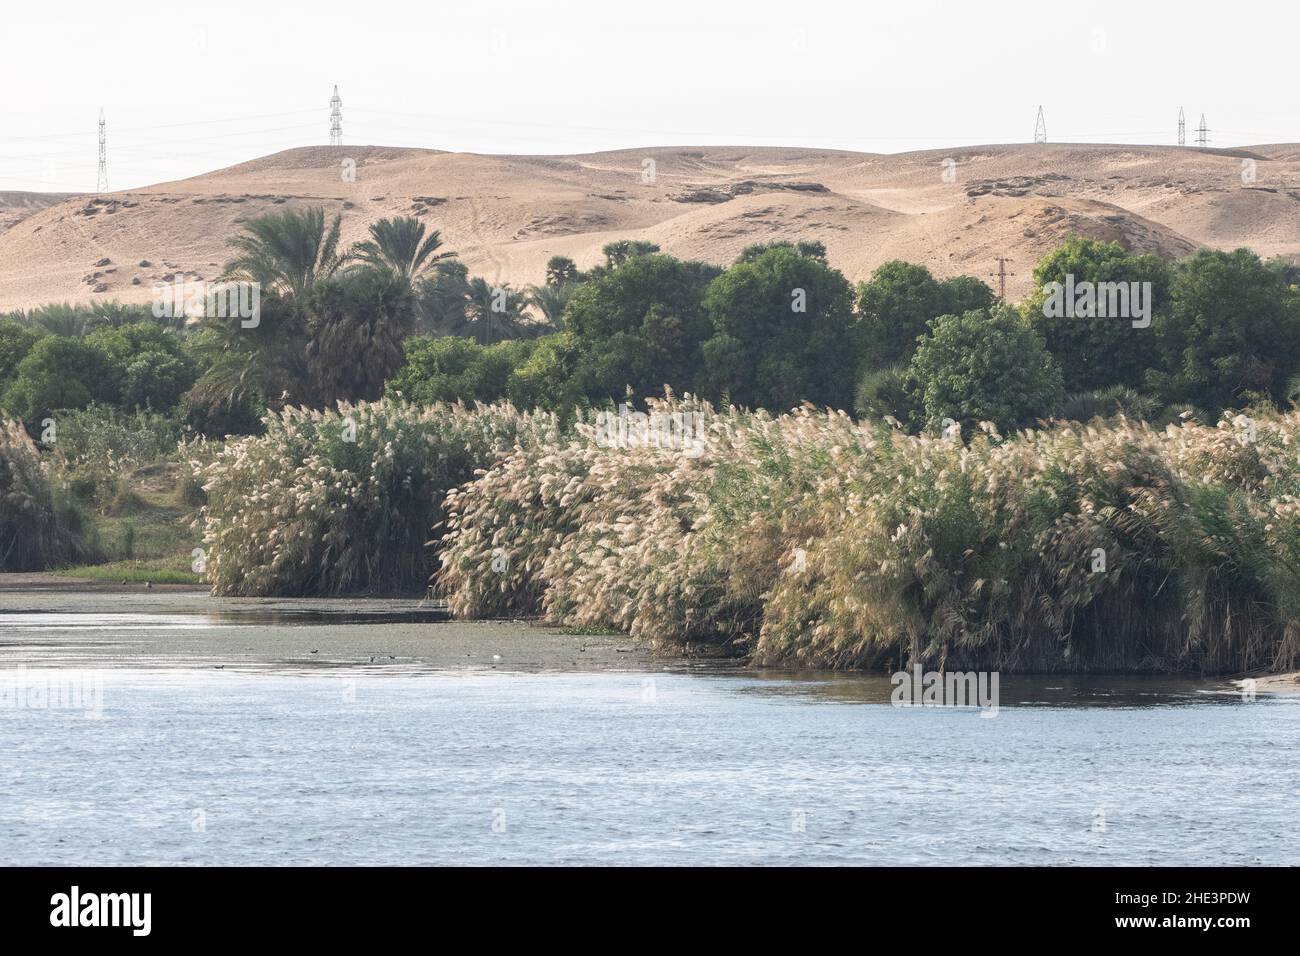 The edge of the Nile river in Egypt with lush vegetation and papyrus growing along the waters edge. Stock Photo